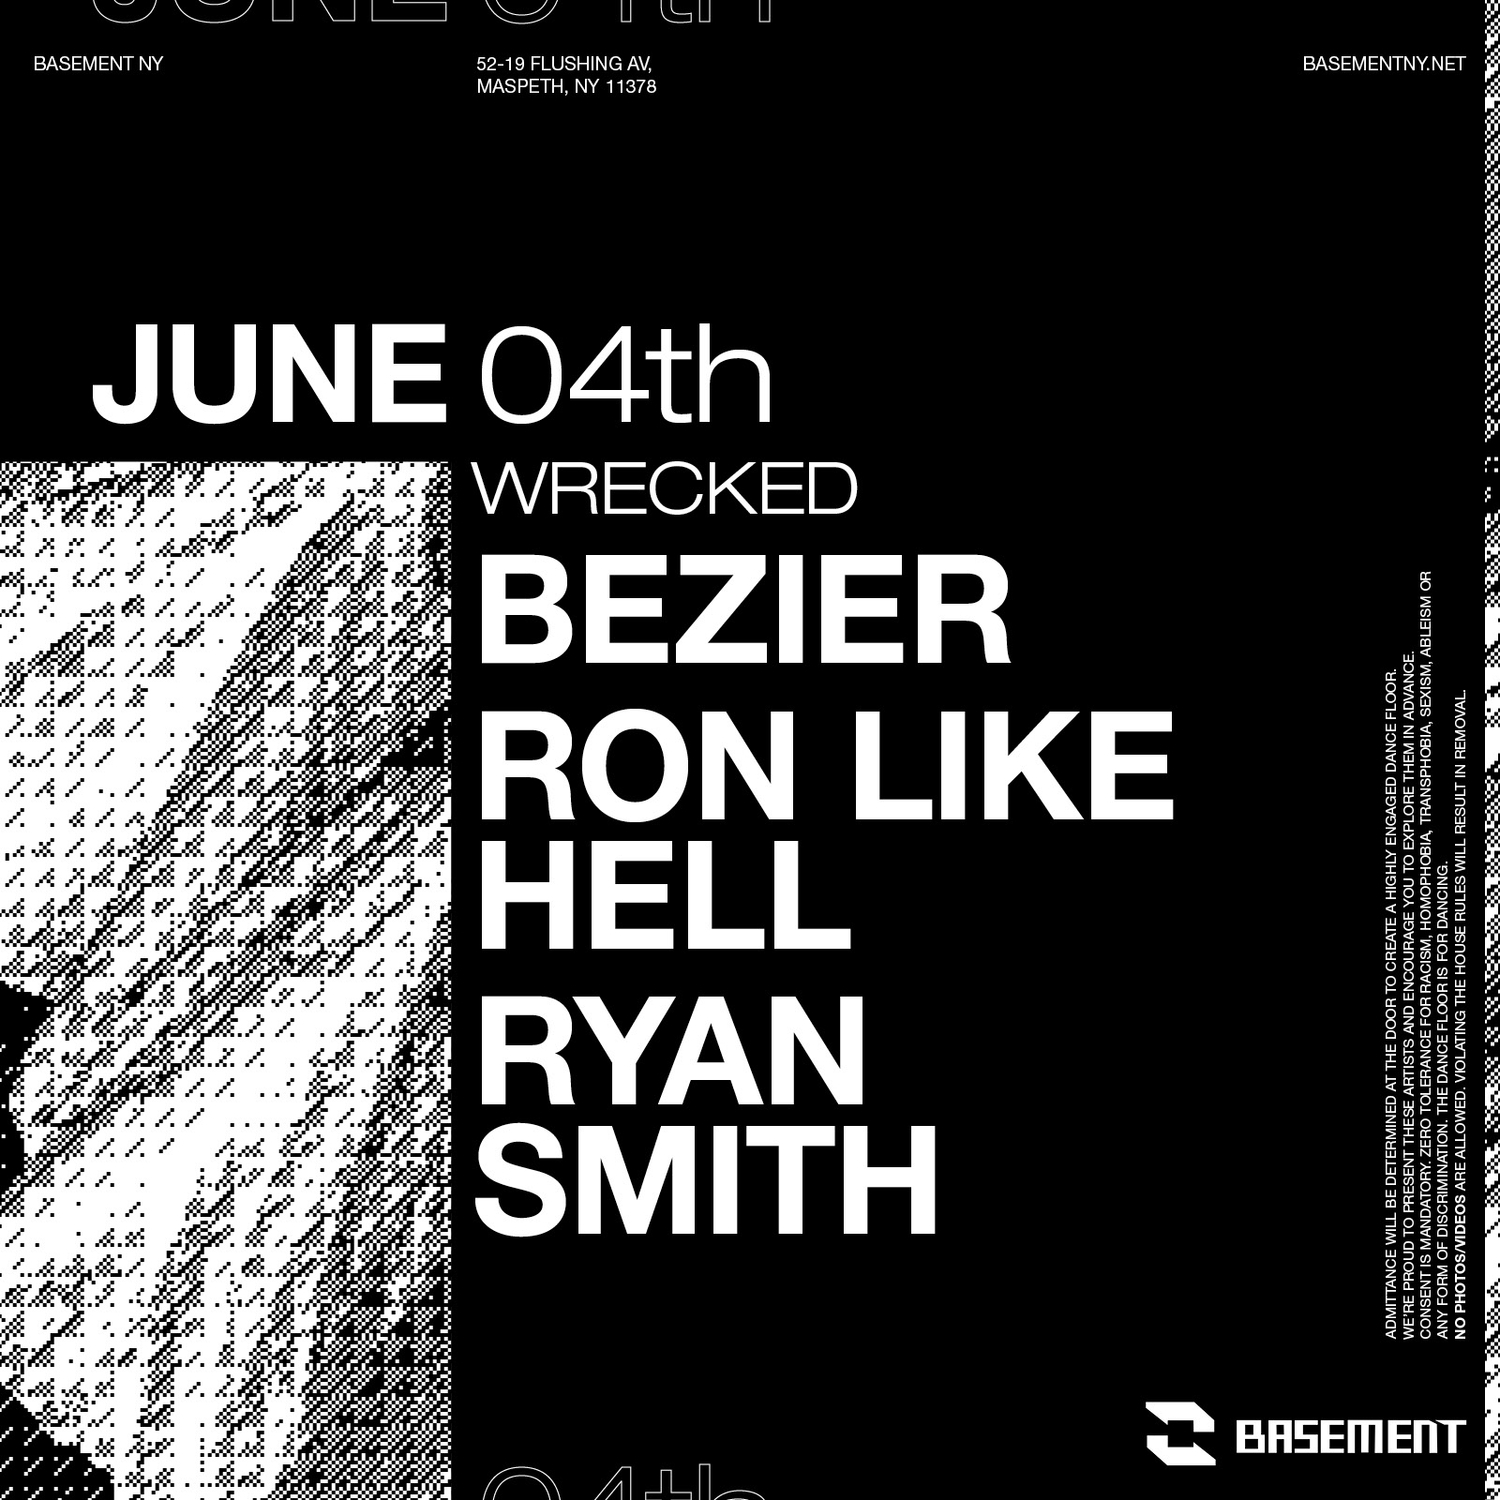 Flyer for Basement NY with Wrecked - Ryan Smith, Ron Like Hell Bézier June 04 2022 